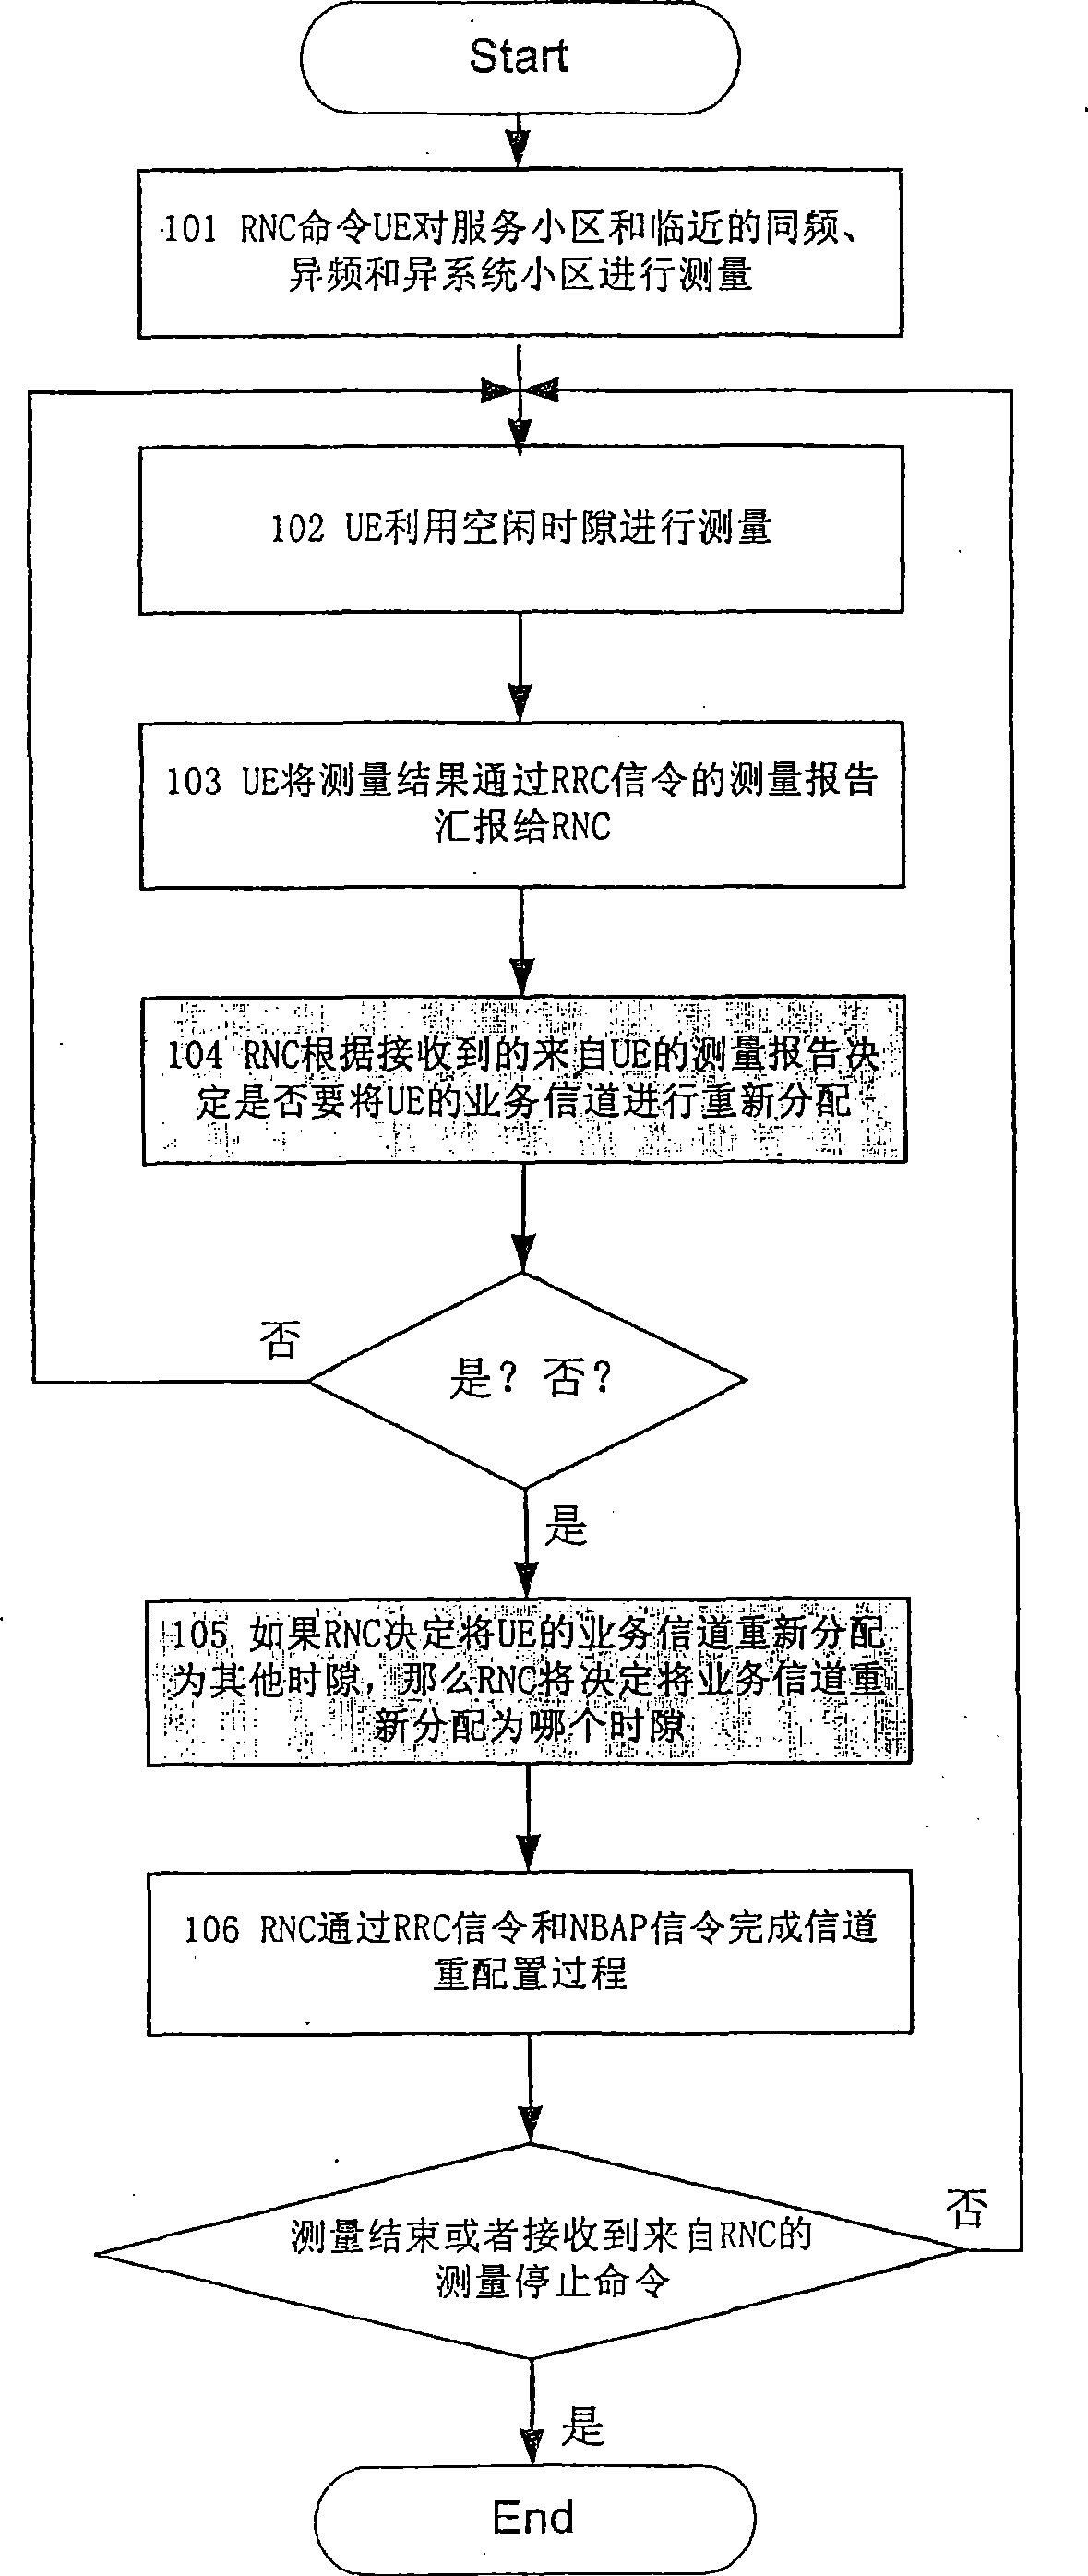 Method for controlling inter-frequency and inter-system handover measurement by RNC